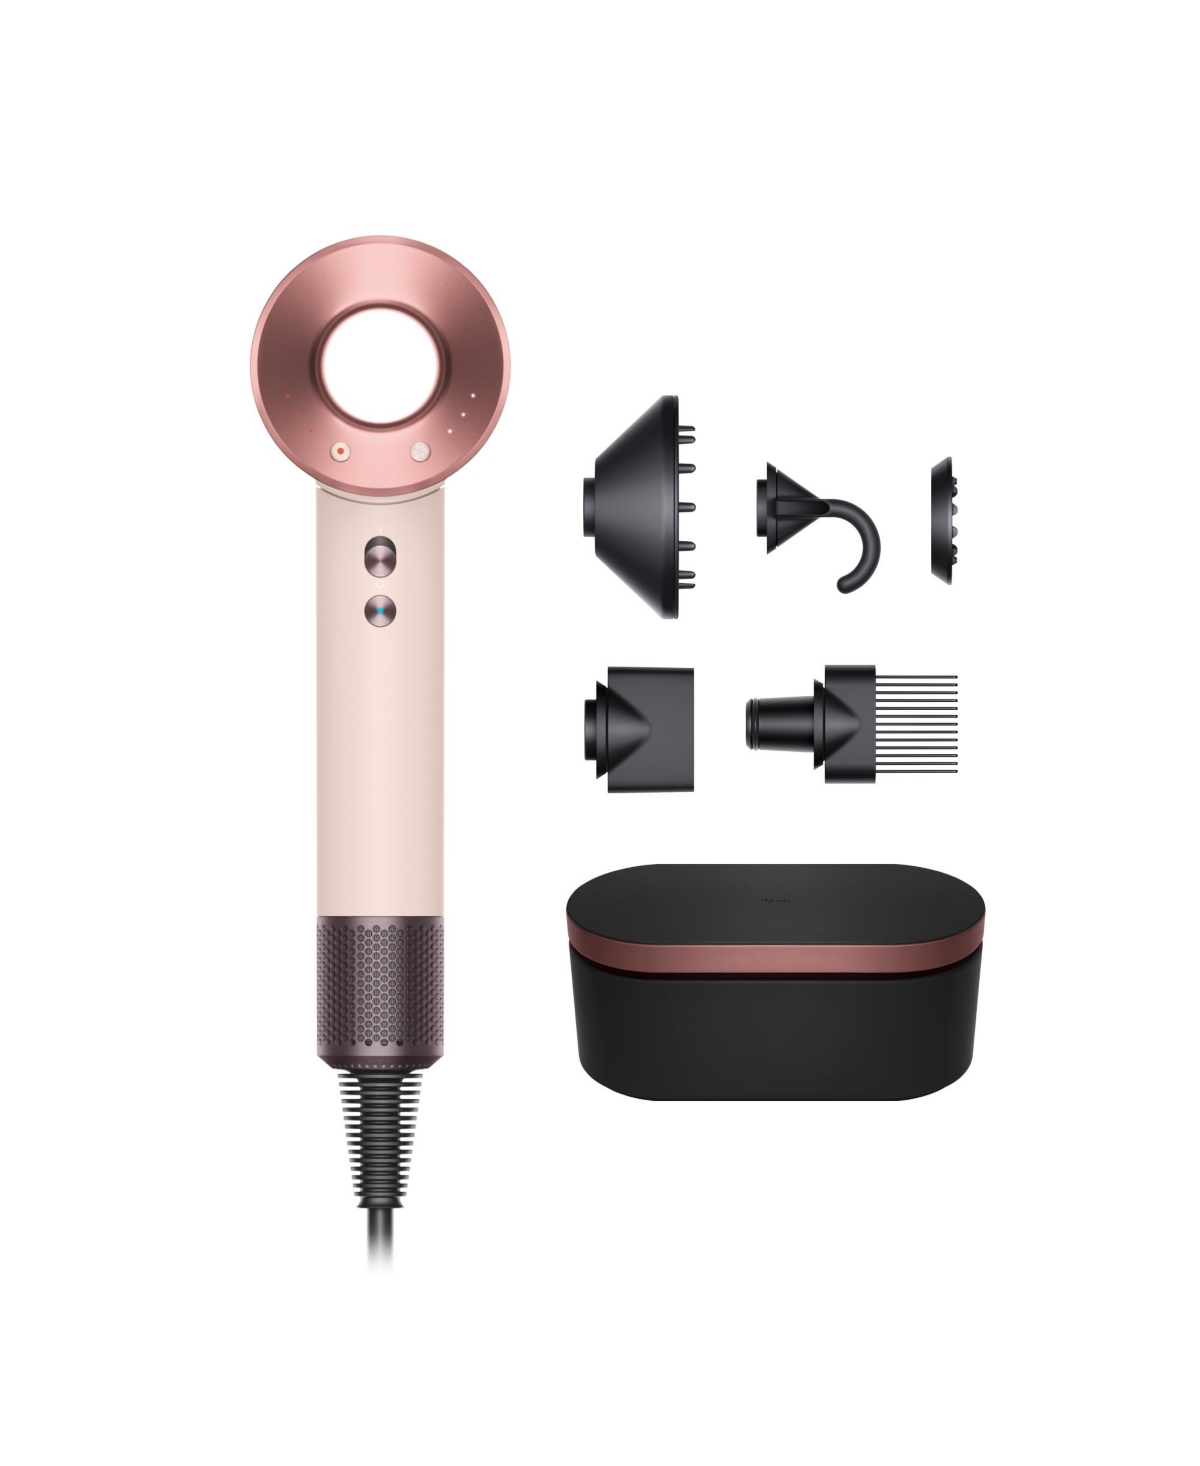 Supersonic hair dryer-Limited Edition Ceramic Pink/Rose Gold - Ceramic pink/rose gold